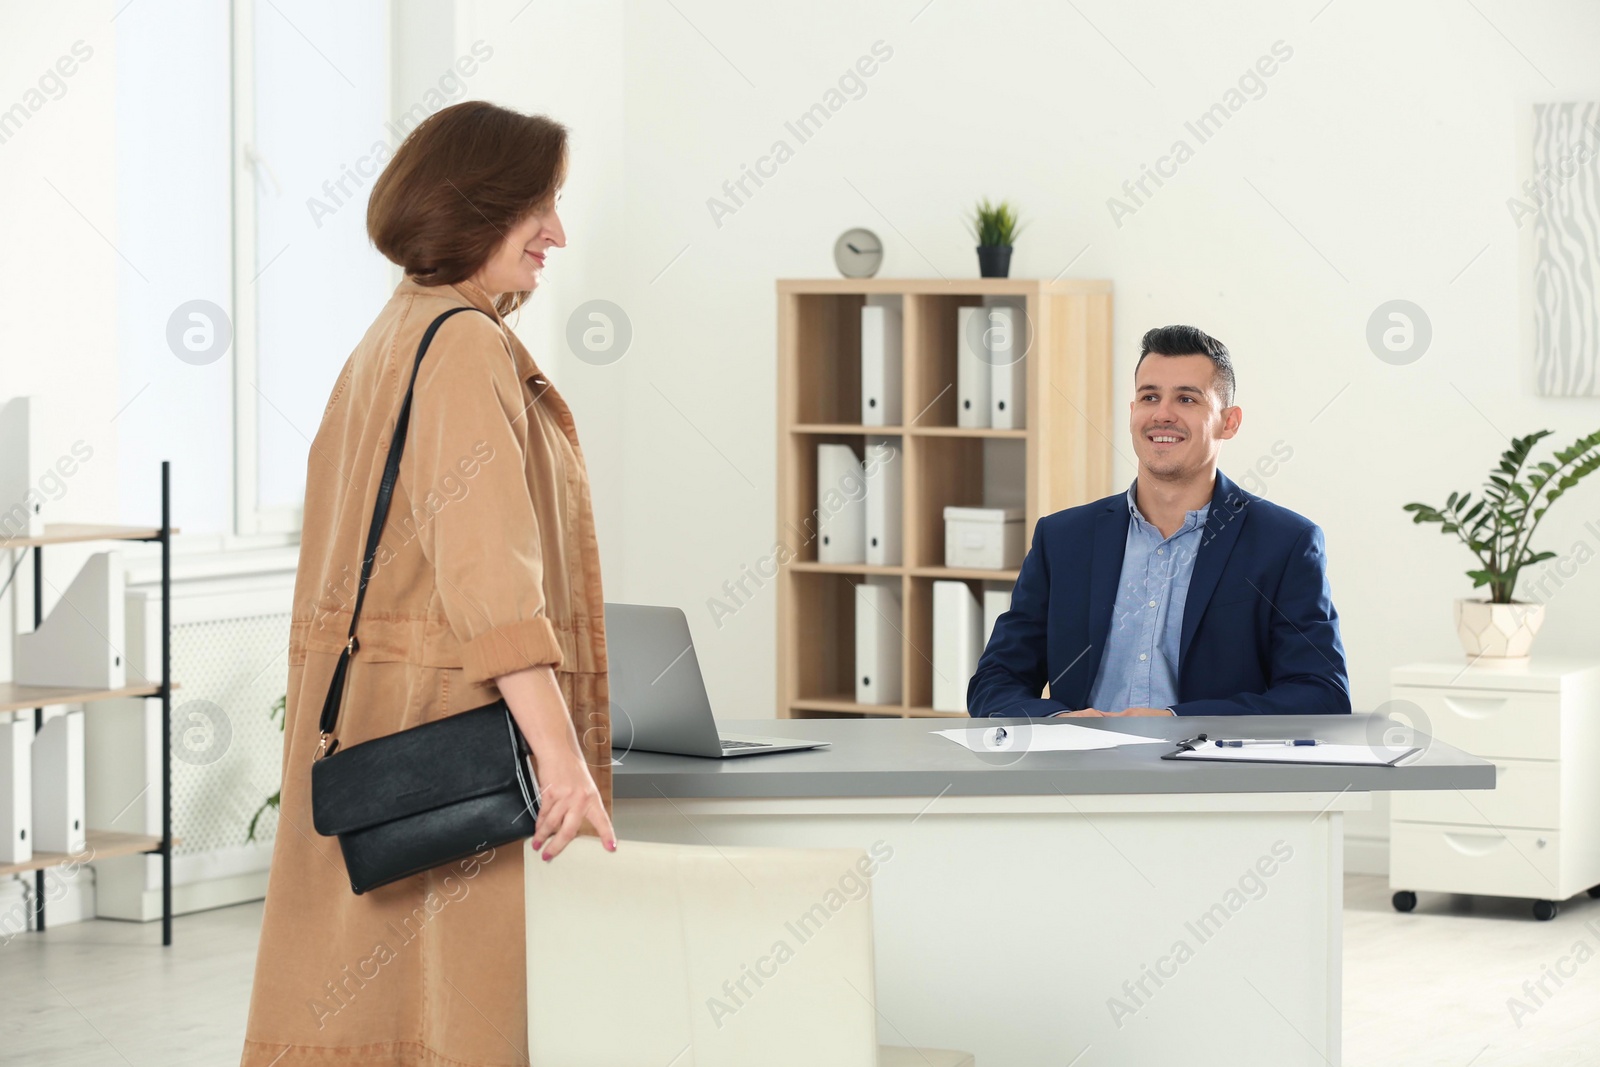 Photo of Human resources manager speaking with applicant before job interview in office